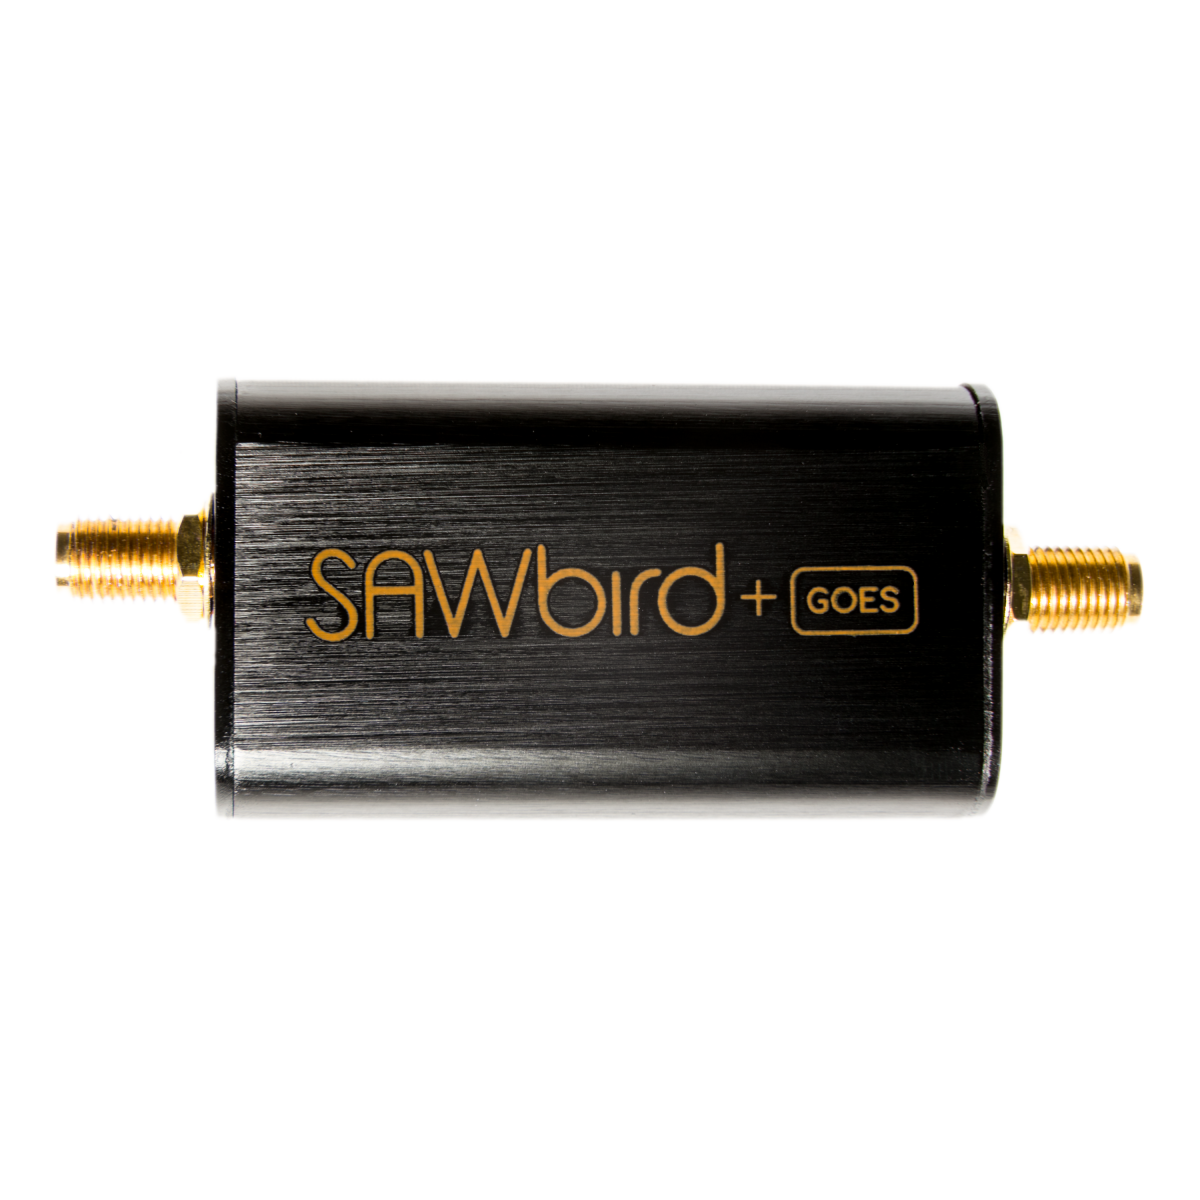 Nooelec SAWbird+ GOES - Premium SAW Filter & Cascaded Ultra-Low Noise LNA  Module for NOAA (GOES/LRIT/HRIT/HRPT) Applications. 1688MHz Center Frequency